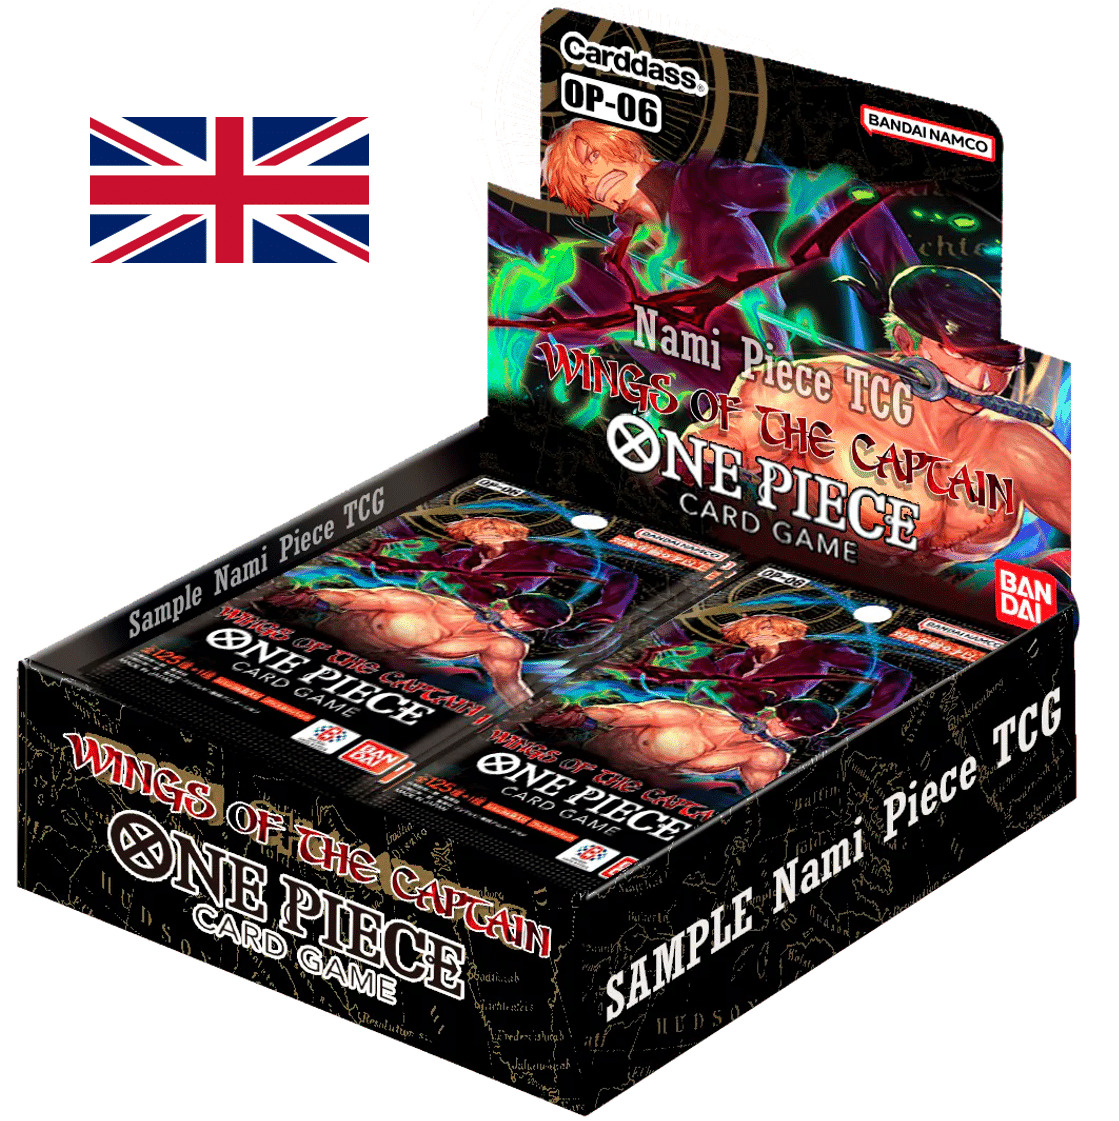 One Piece TCG Booster Box WINGS OF THE CAPTAIN OP06 OP-06 ENGLISH